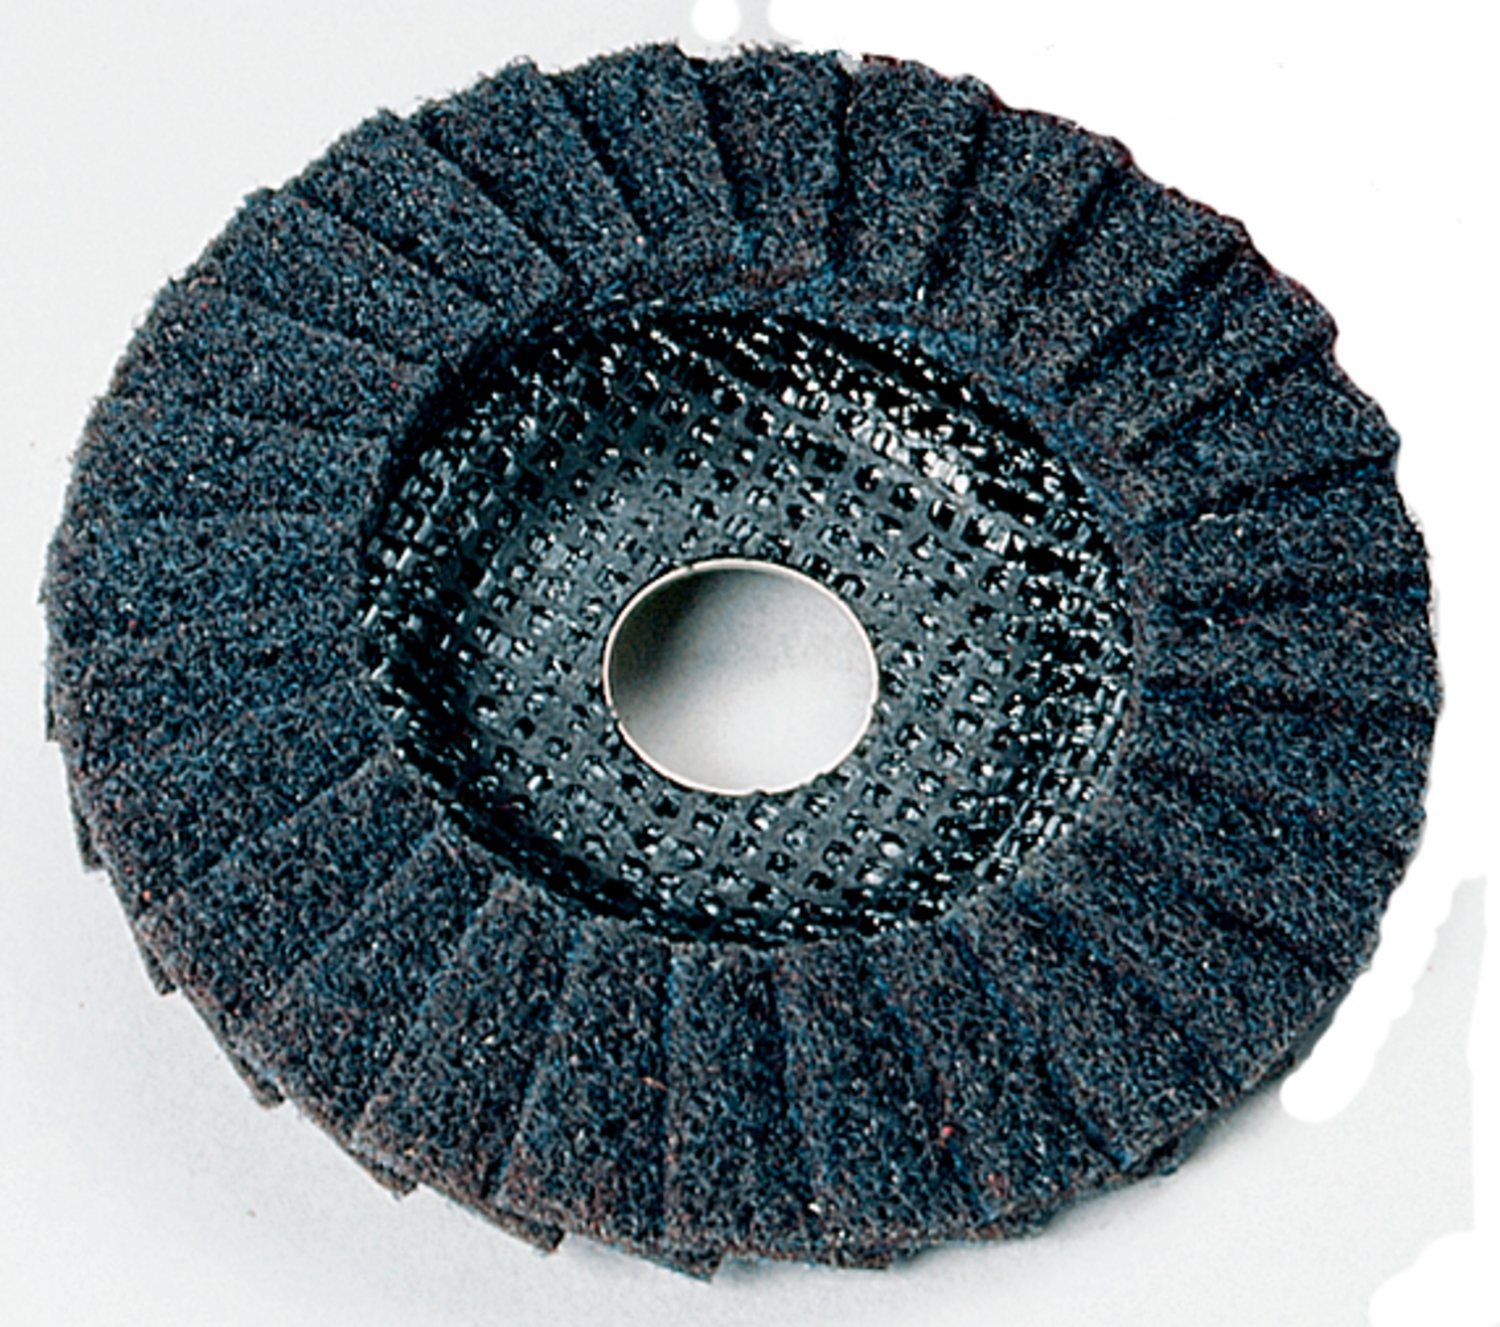 7010330499 - Standard Abrasives Surface Conditioning Flap Disc, 821350, Very Fine,
4-1/2 in x 5/8 in-11, 5/Carton, 50 ea/Case